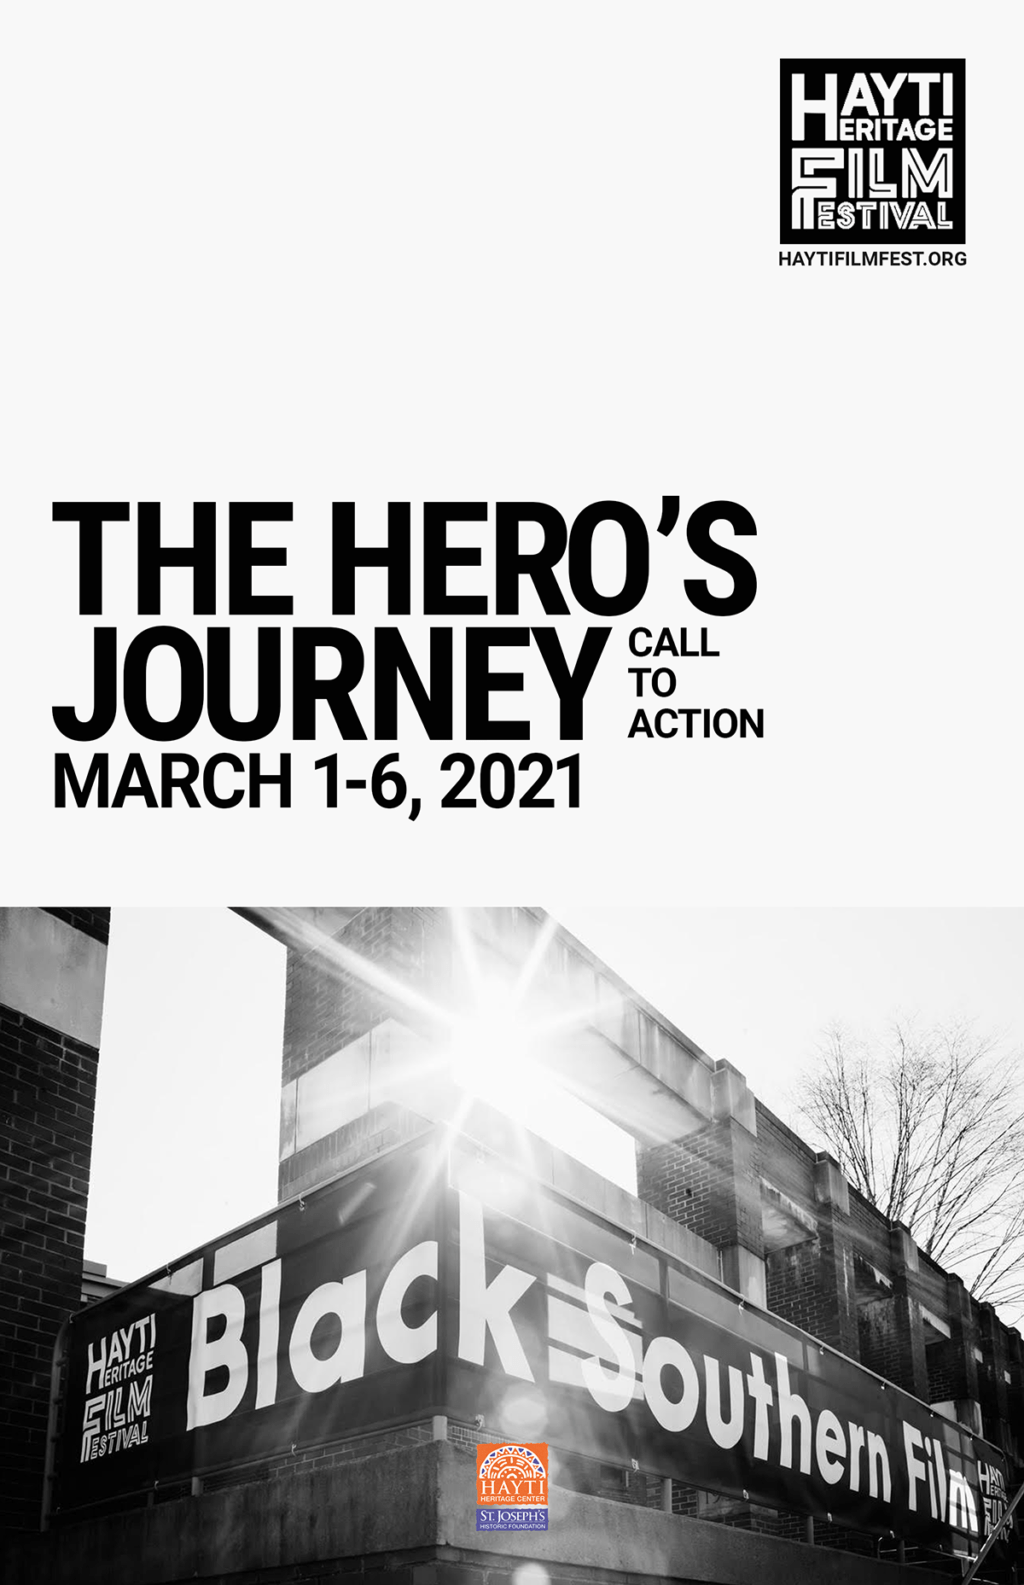 Hayti Heritage Film Festival-- The Hero's Journey: Call to Action, March 1-6, 2021